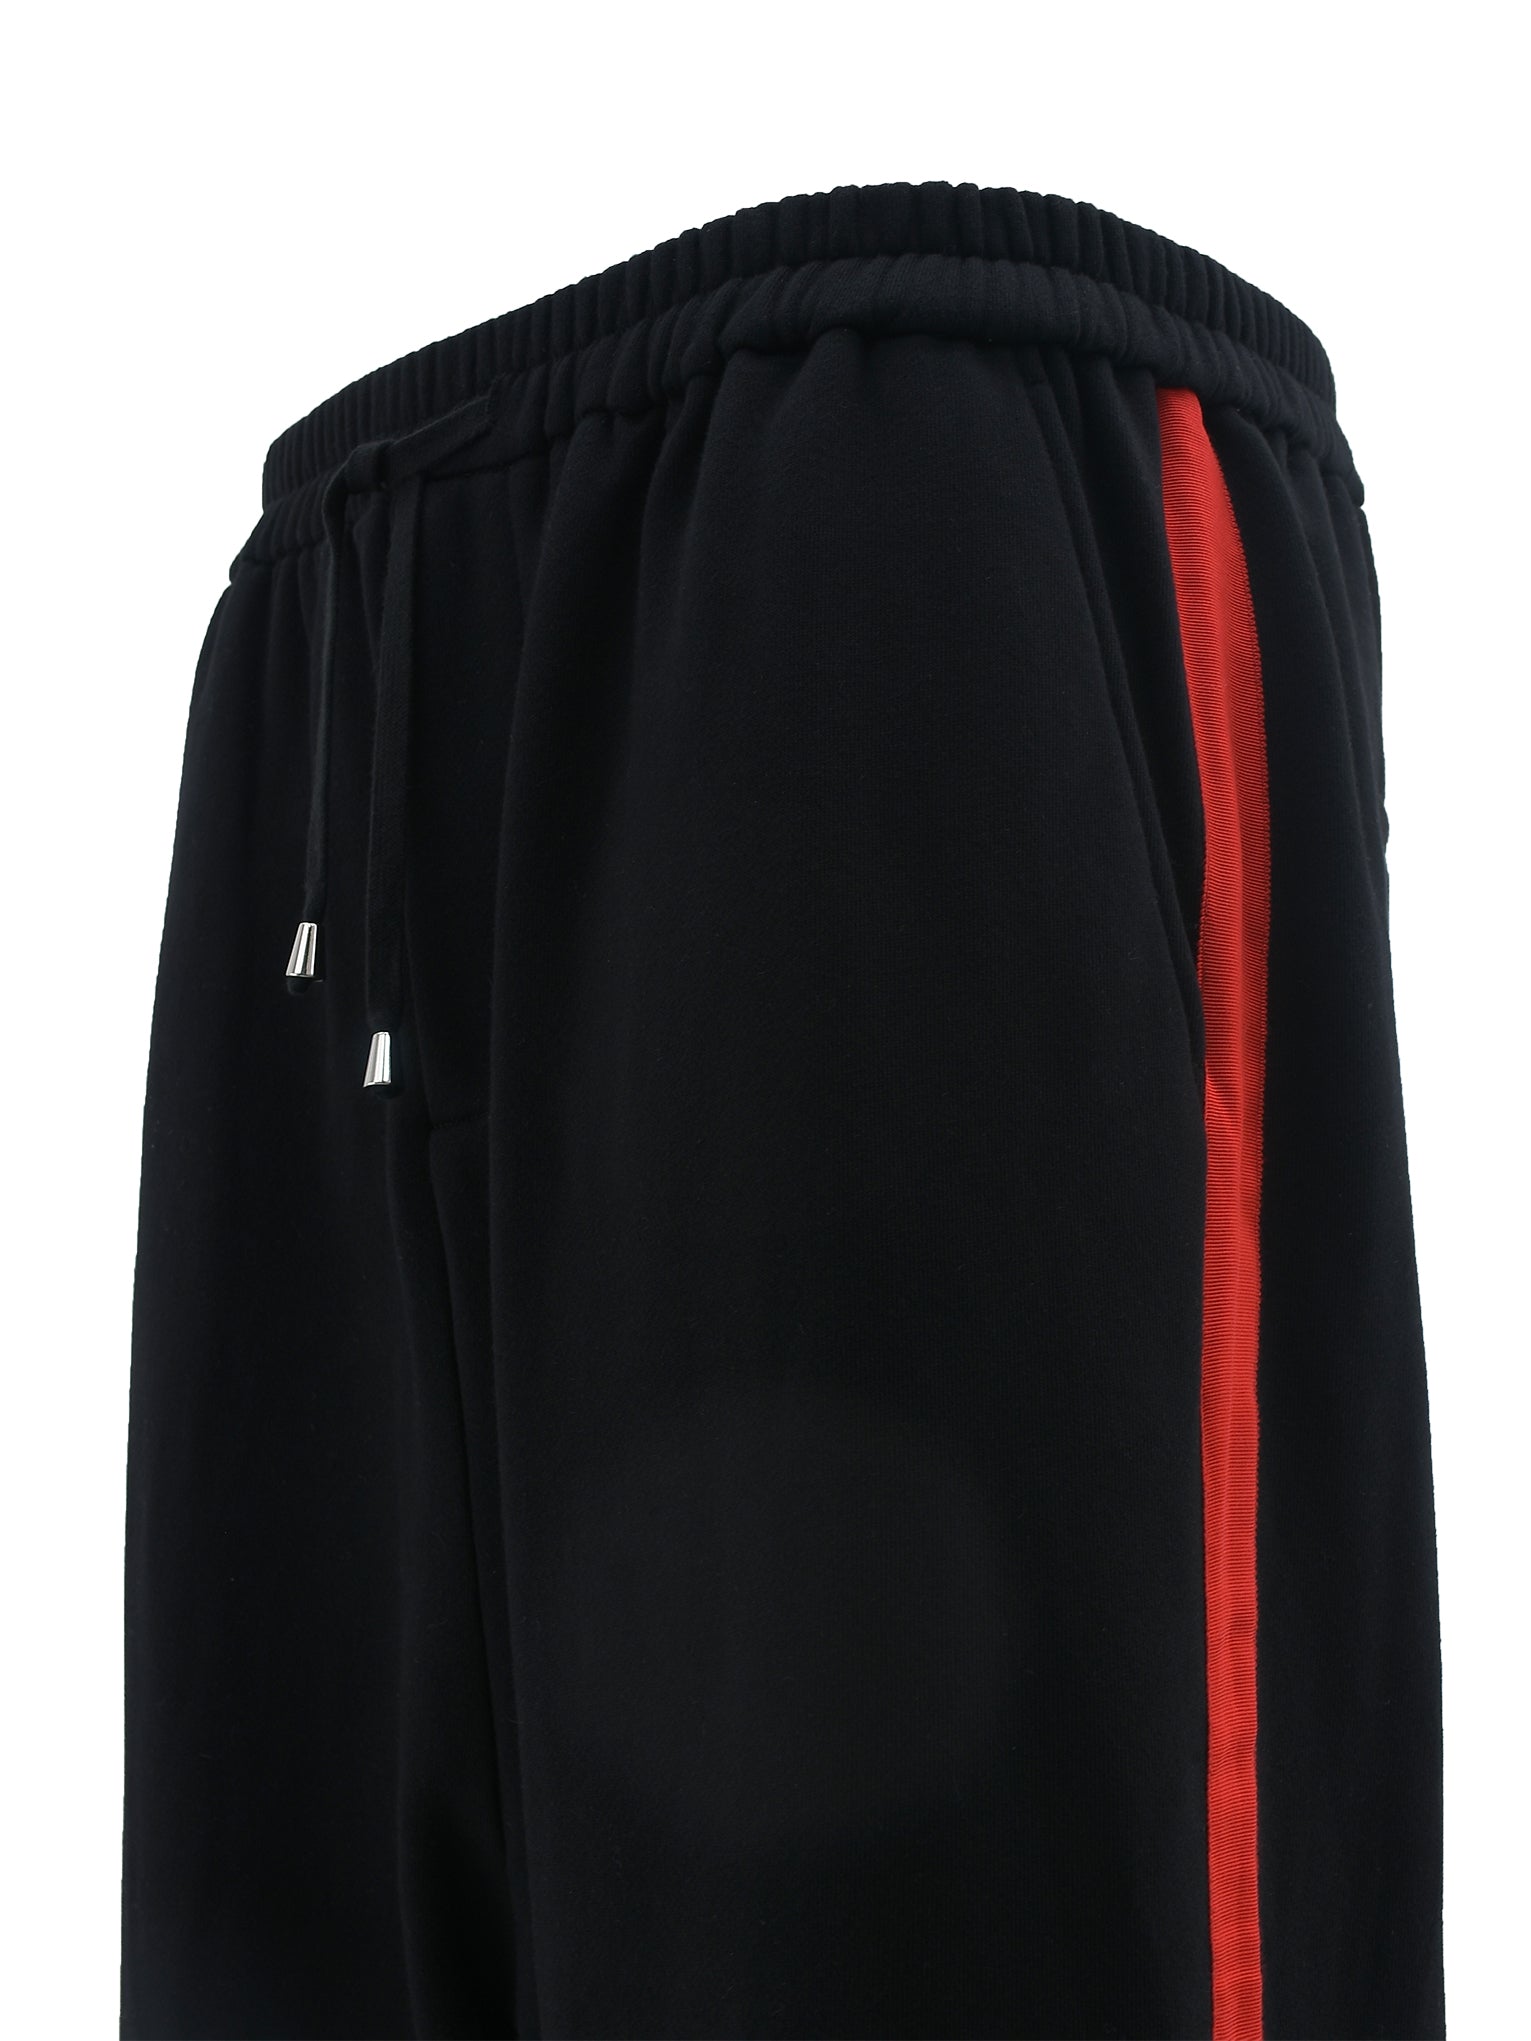 BLACK RED SIDE STRIPE BAGGY JOGGERS